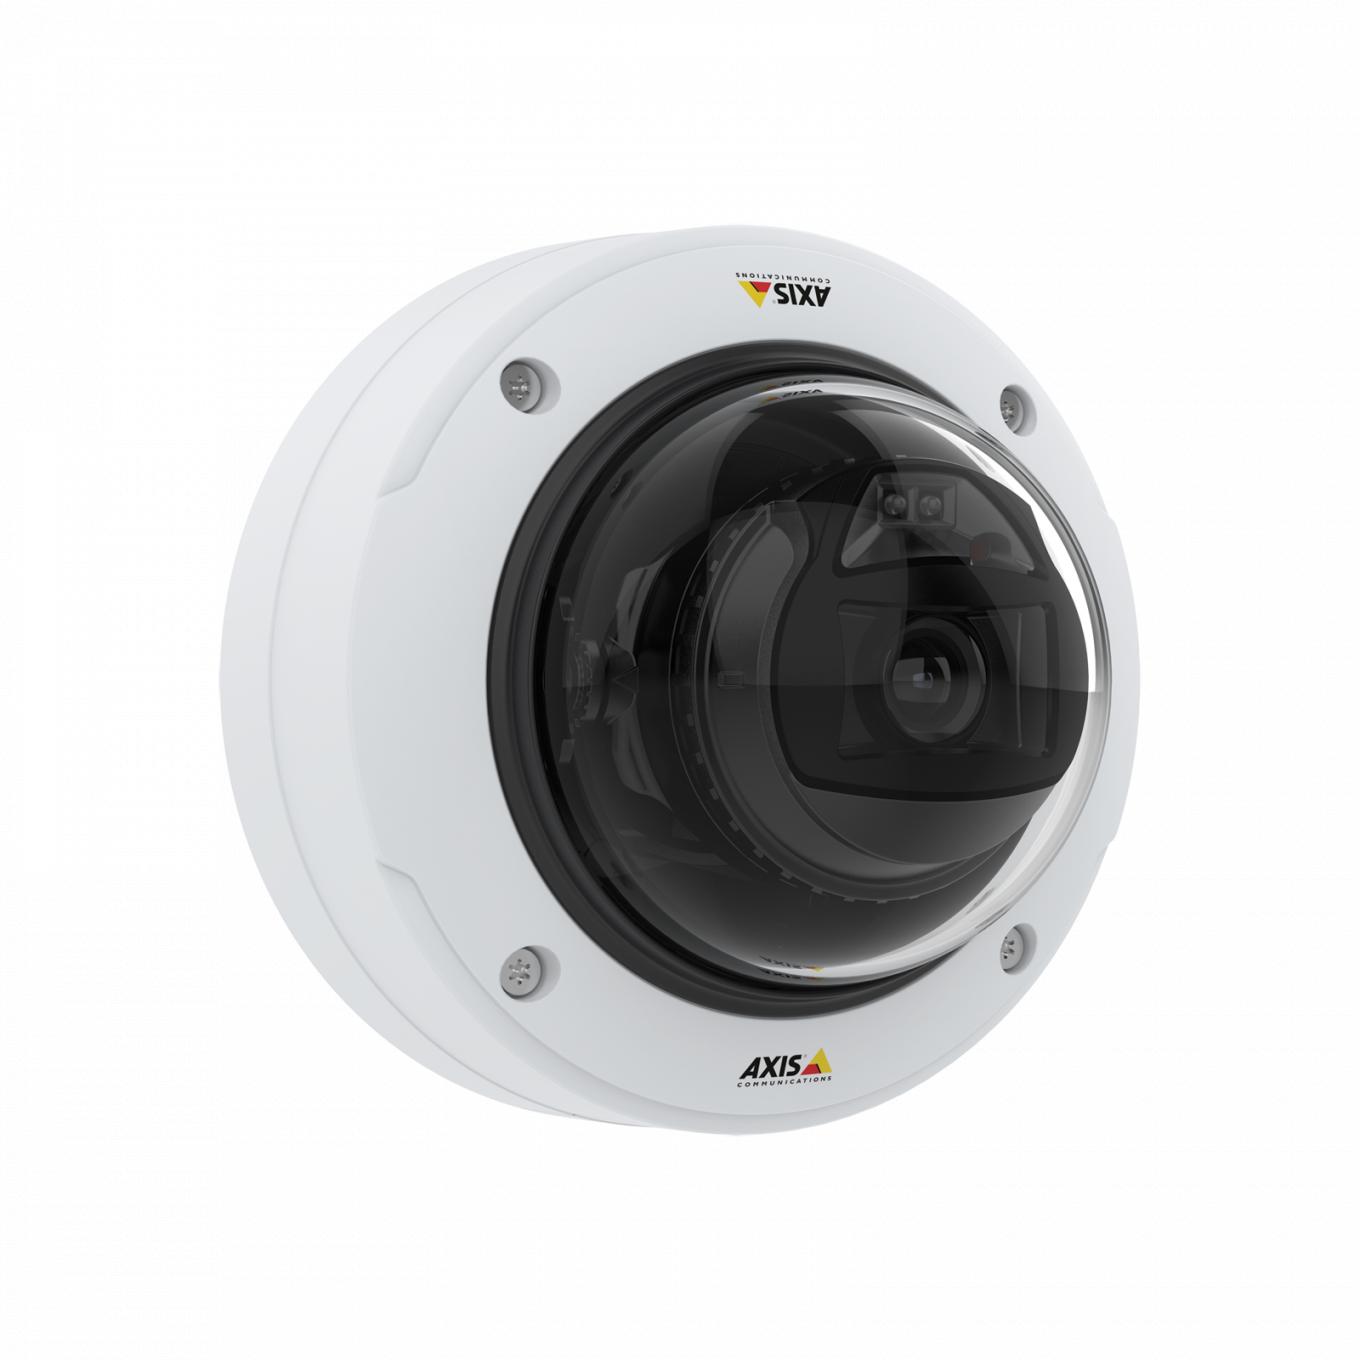 AXIS P3255-LVE Dome Camera, viewed from its right